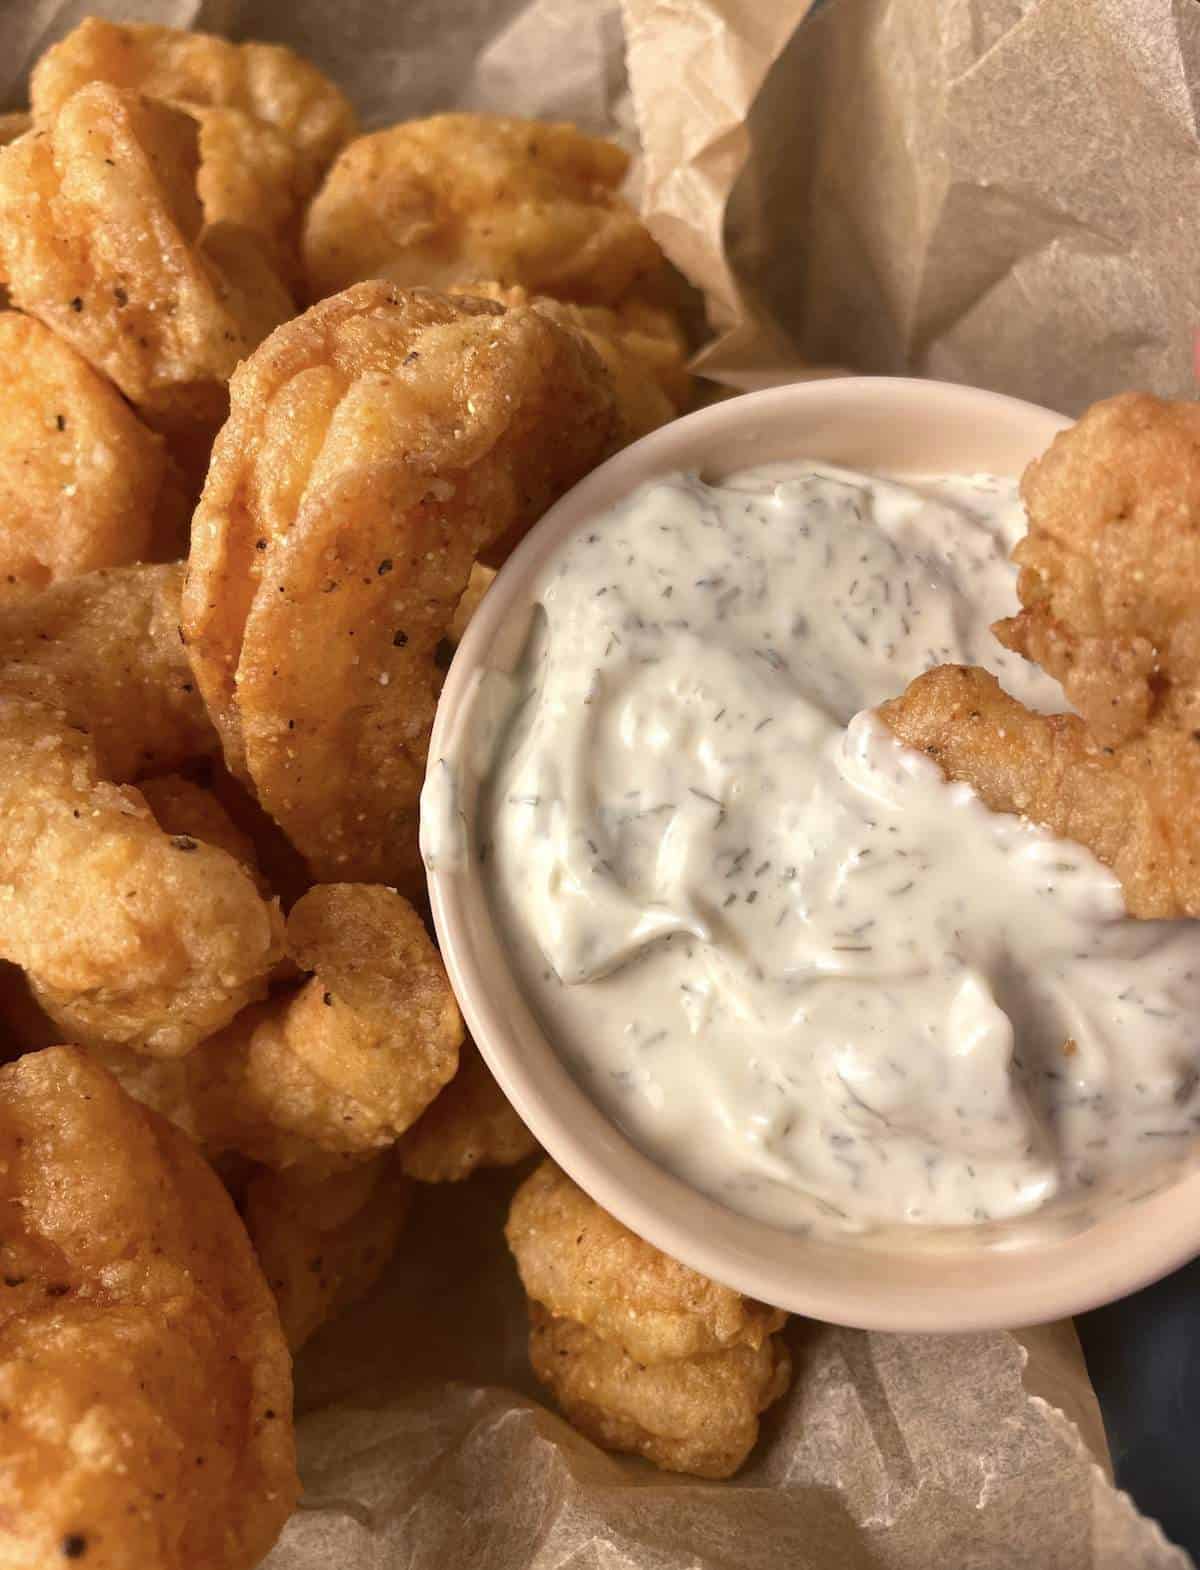 A bowl of popcorn shrimp with a small bowl of tartar sauce with a shrimp in it.